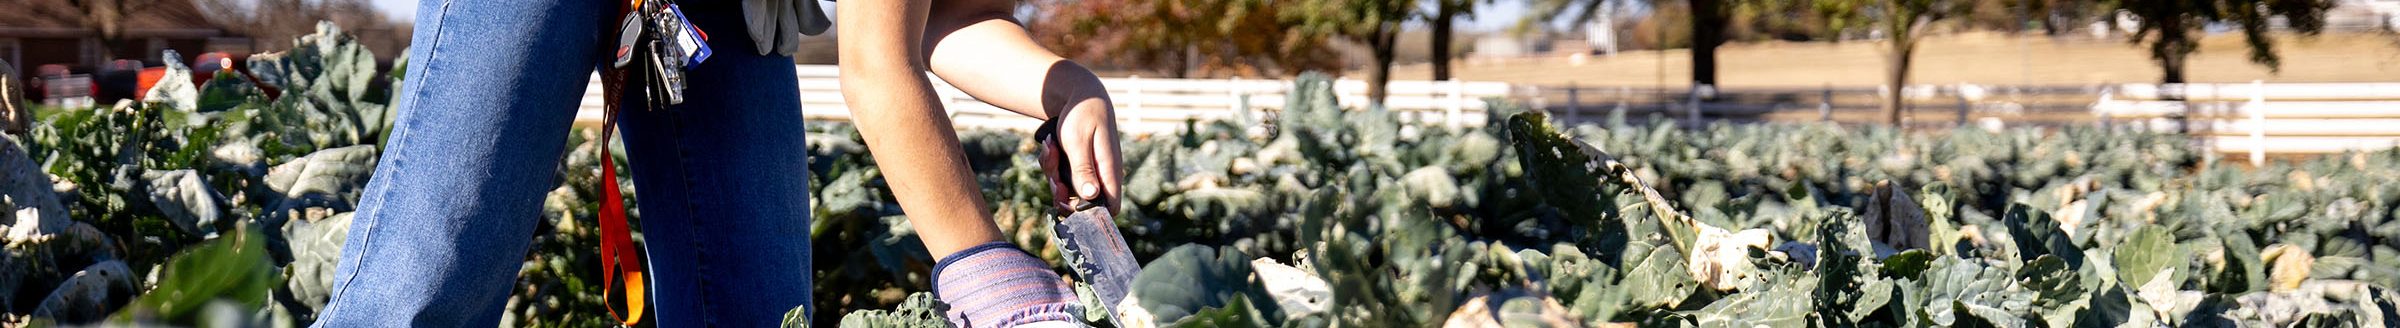 Students at the OSU Student Farm are involved in every phase of establishing and operating the university’s commercial garden, which provides hands-on experience in vegetable production. (Photo by Mitchell Alcala, OSU Agriculture.)